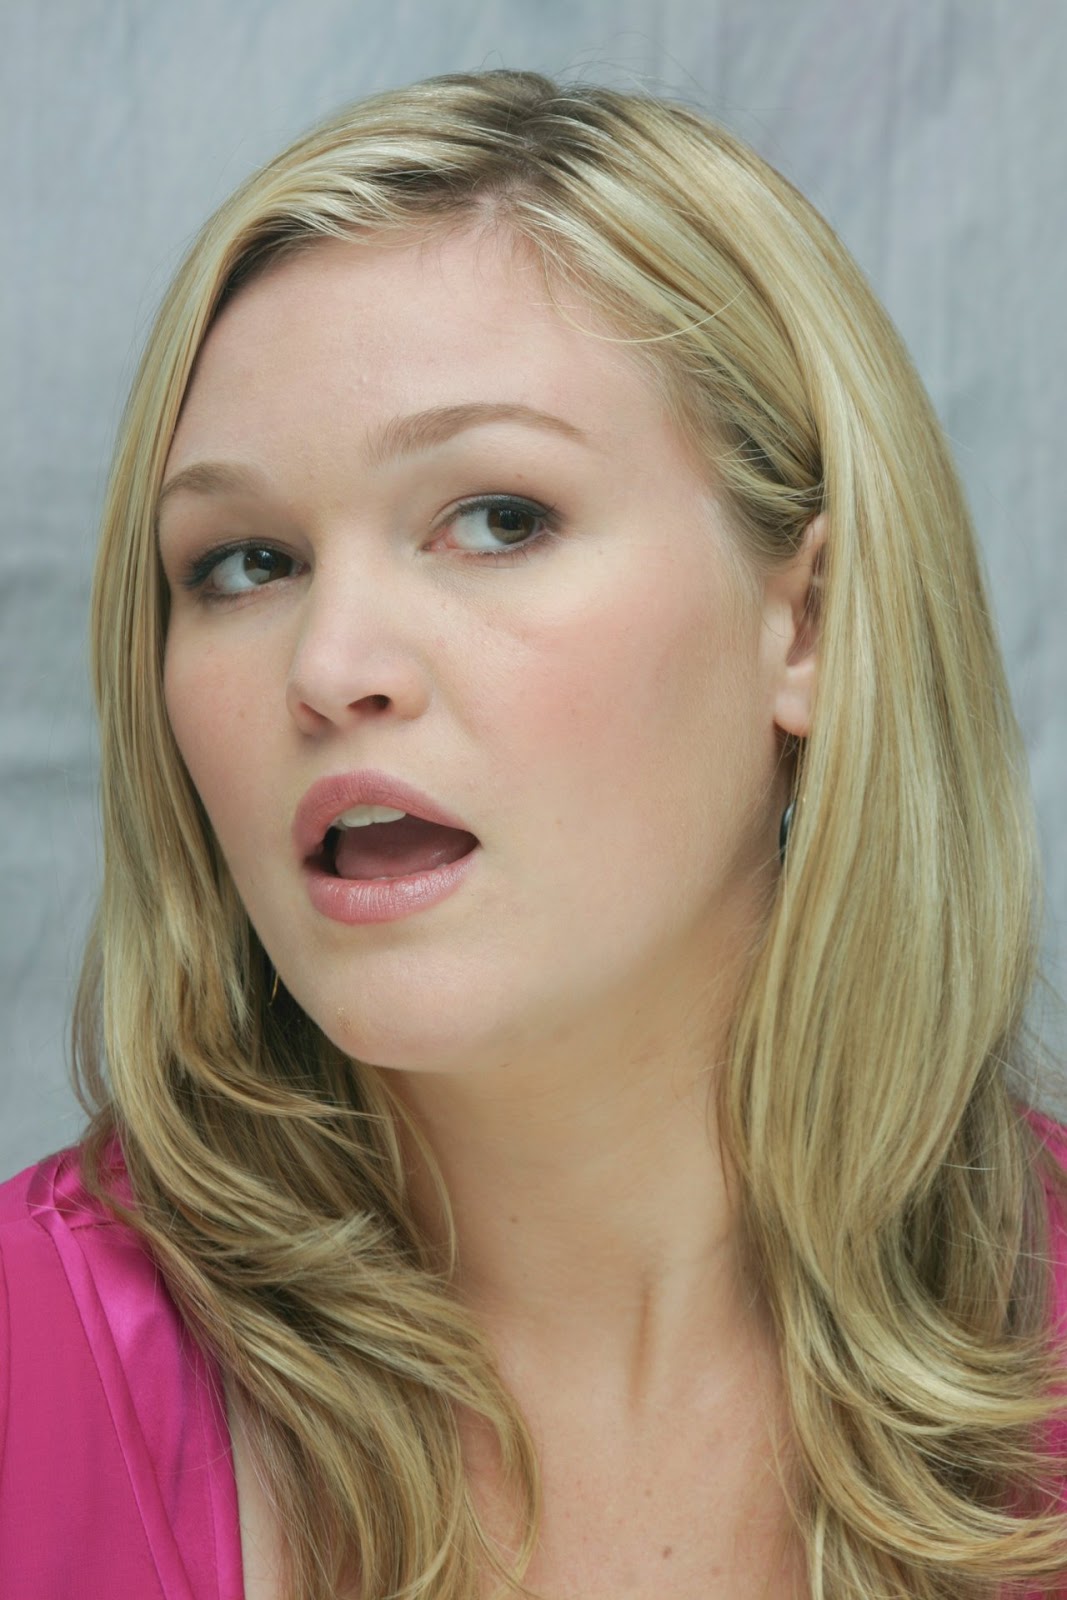 Julia Stiles Bio, Age, Worth, Married, Brother, Sister 